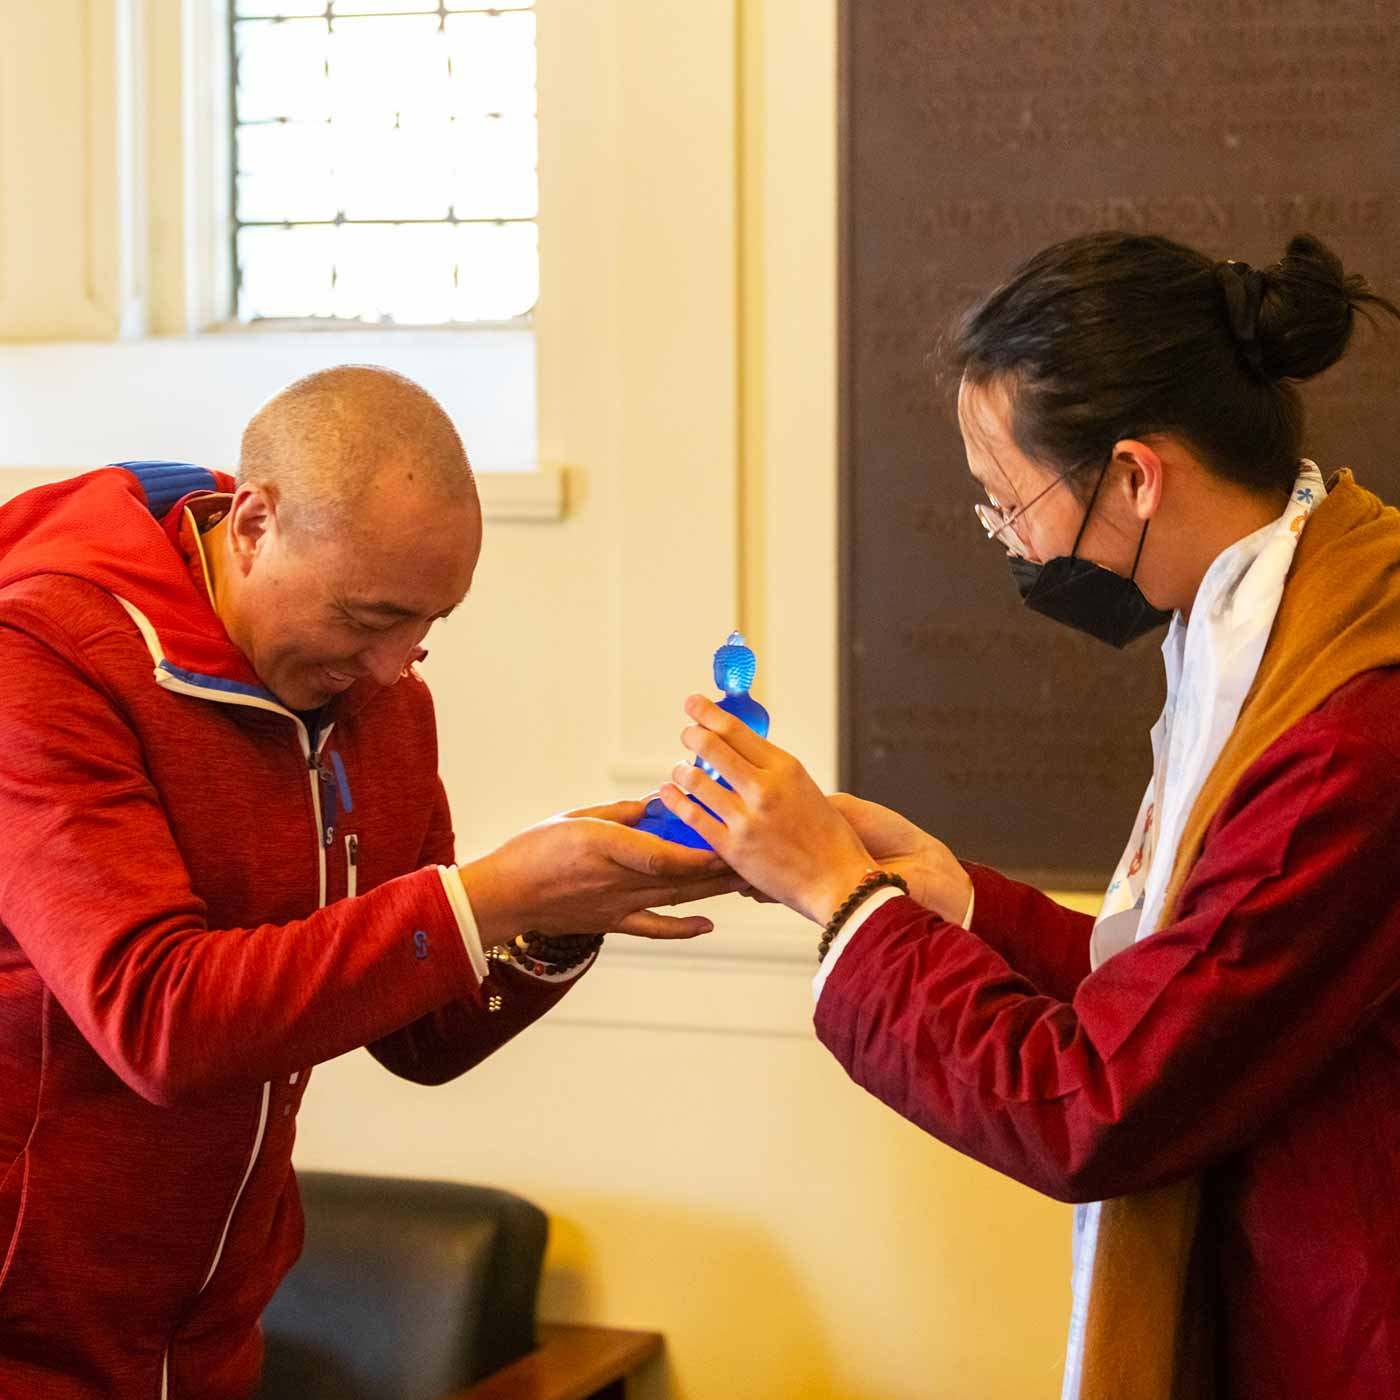 Two people wearing red robes exchange a small glass blue Buddha figurine